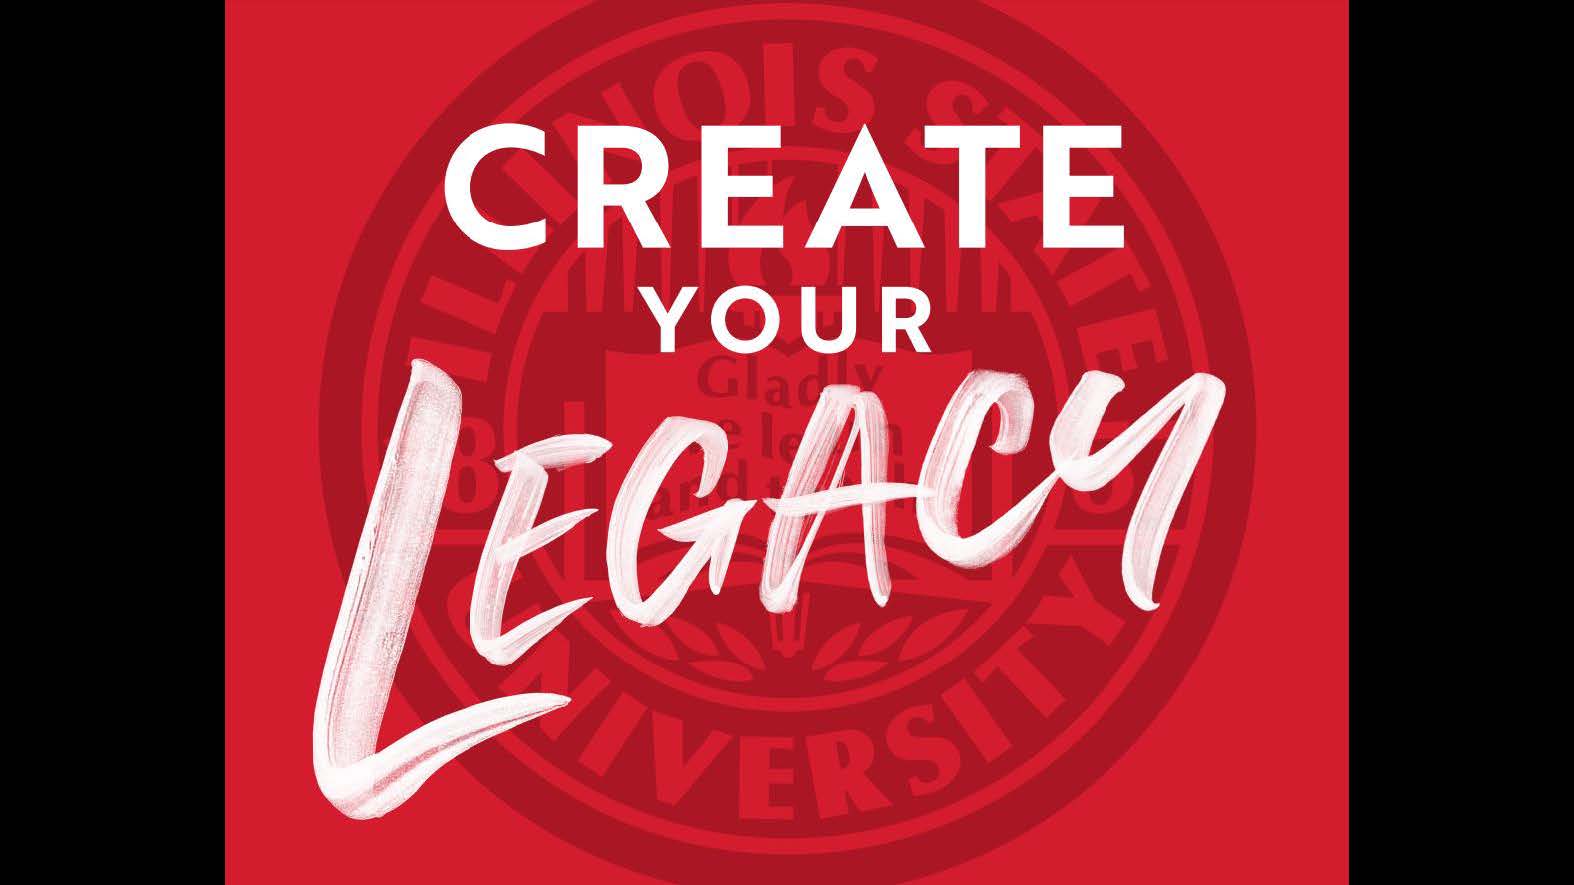 Marketing, Advertising-Campaigns (Silver): Create Your Legacy Motto, Illinois State University designed by Evan Walles for the Office of Admissions.